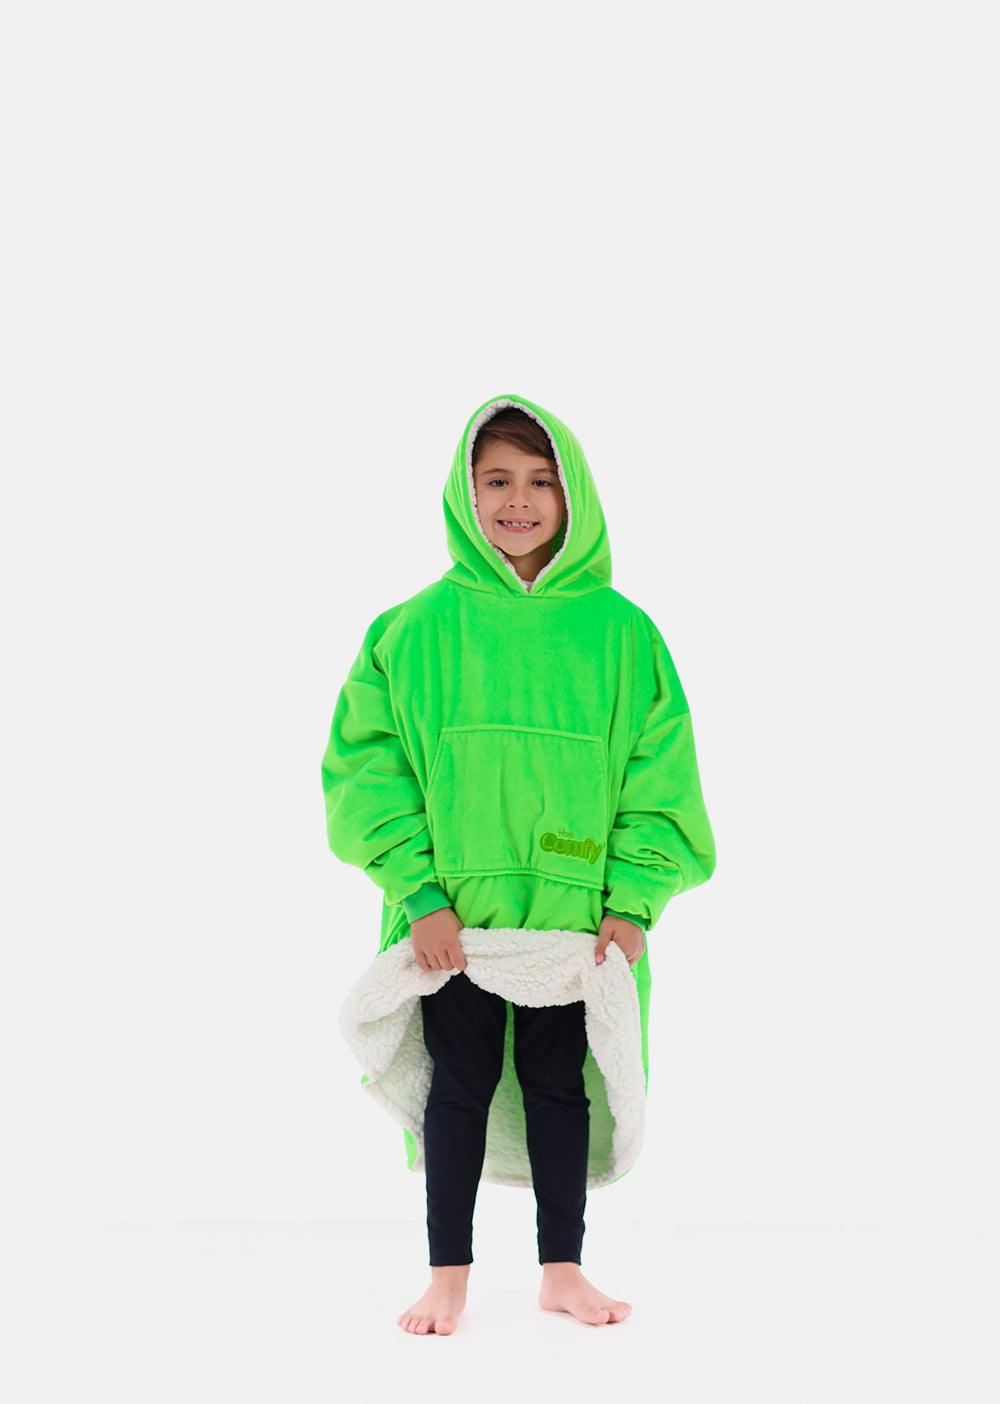 THE COMFY ORIGINAL JR | The Original Oversized Sherpa Blanket for Kids,  Seen On Shark Tank, One Size Fits All Galaxy